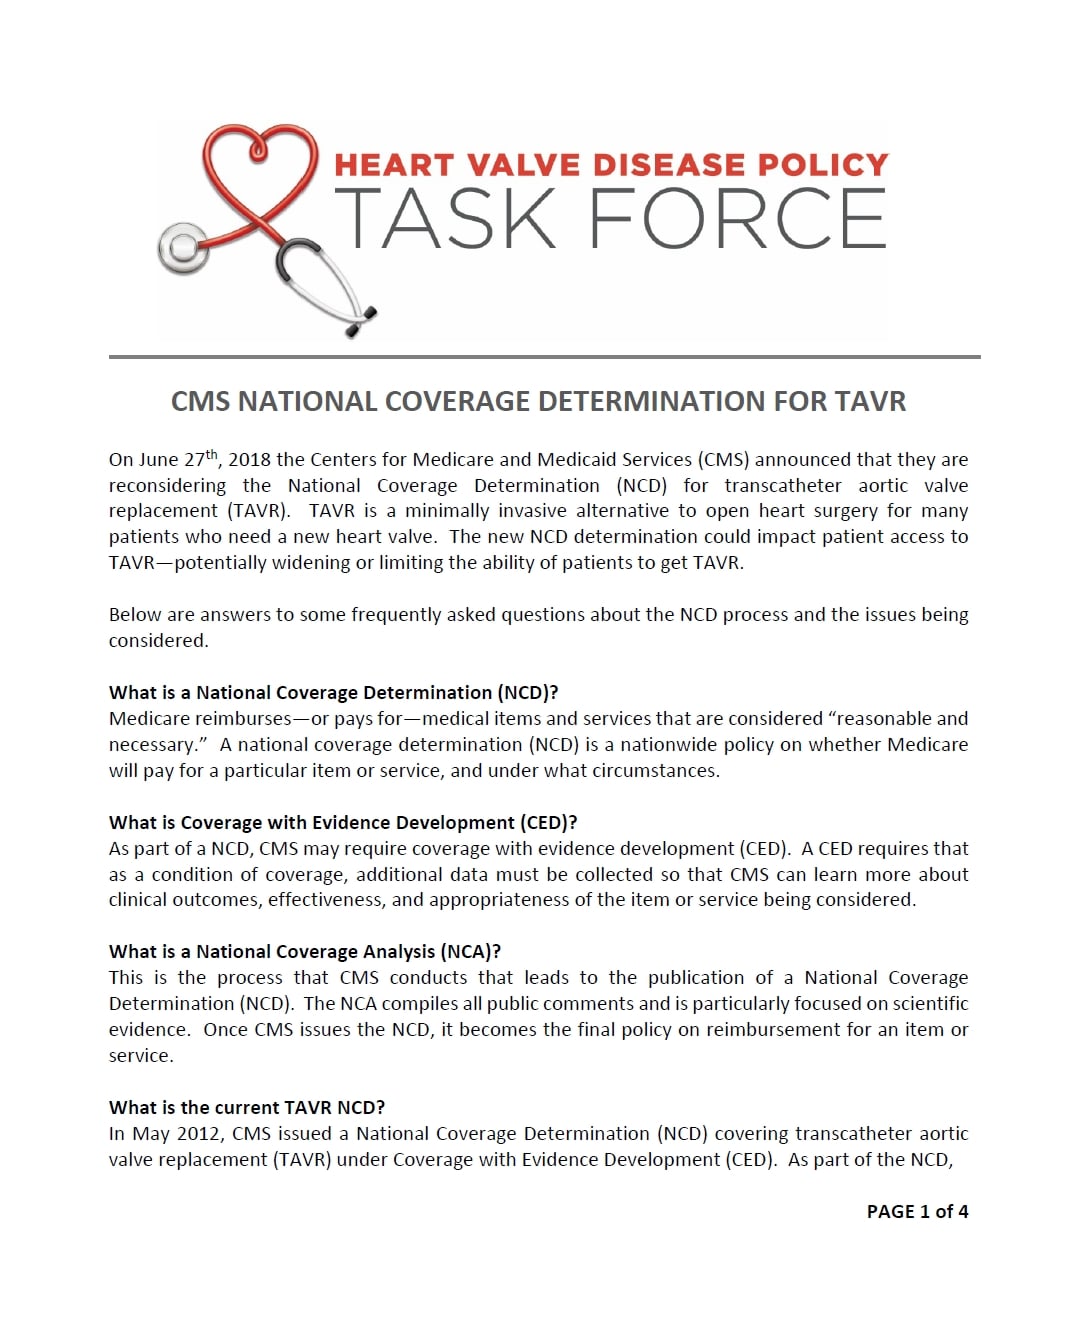 CMS National Coverage Determination for TAVR article.